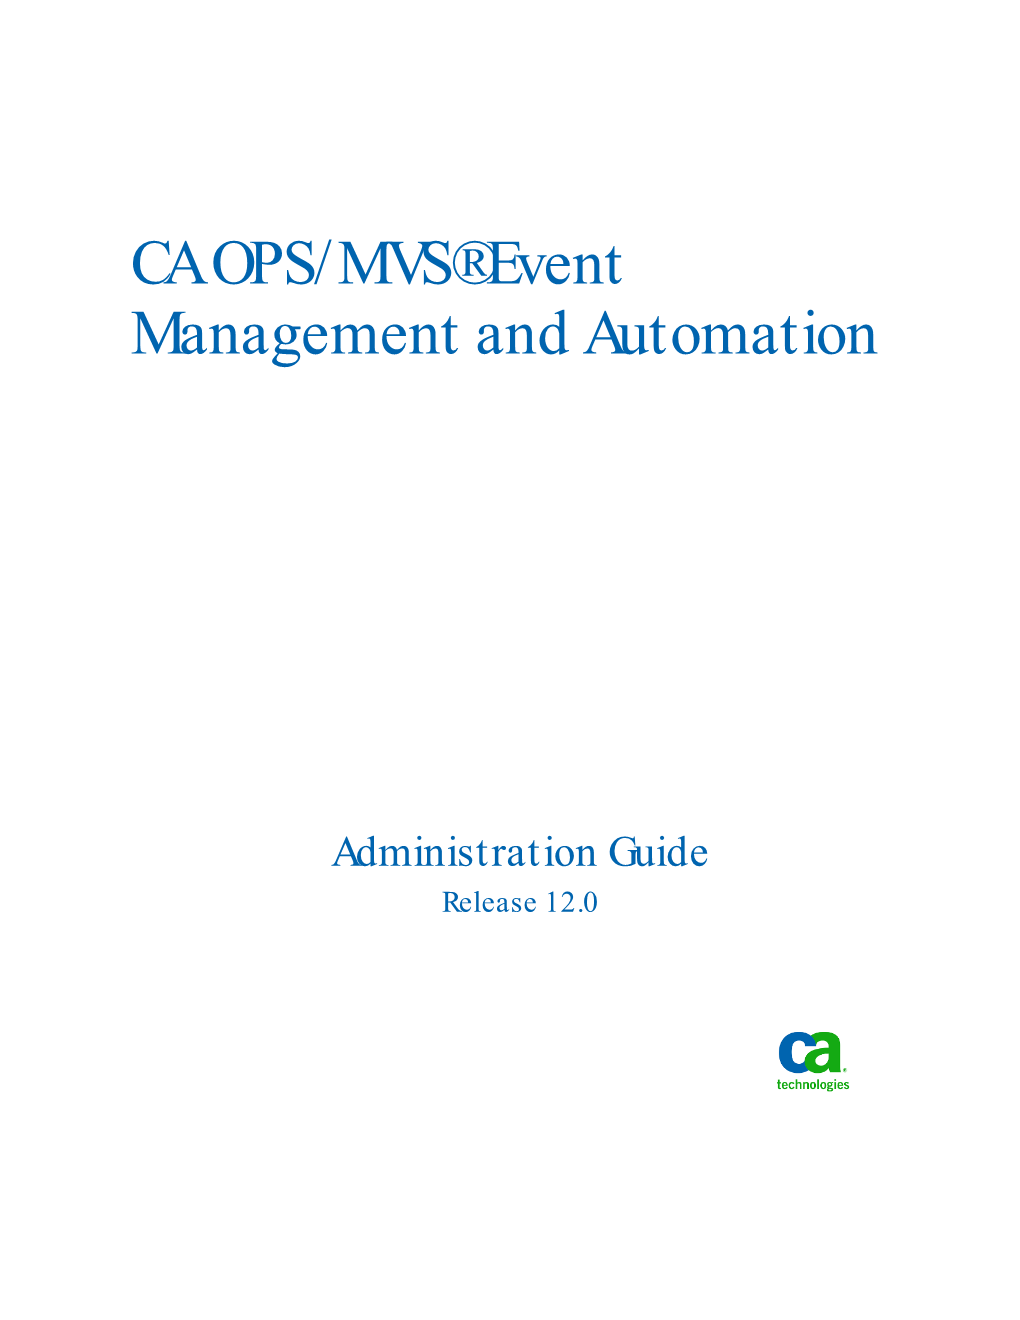 CA OPS/MVS Event Management and Automation Administration Guide